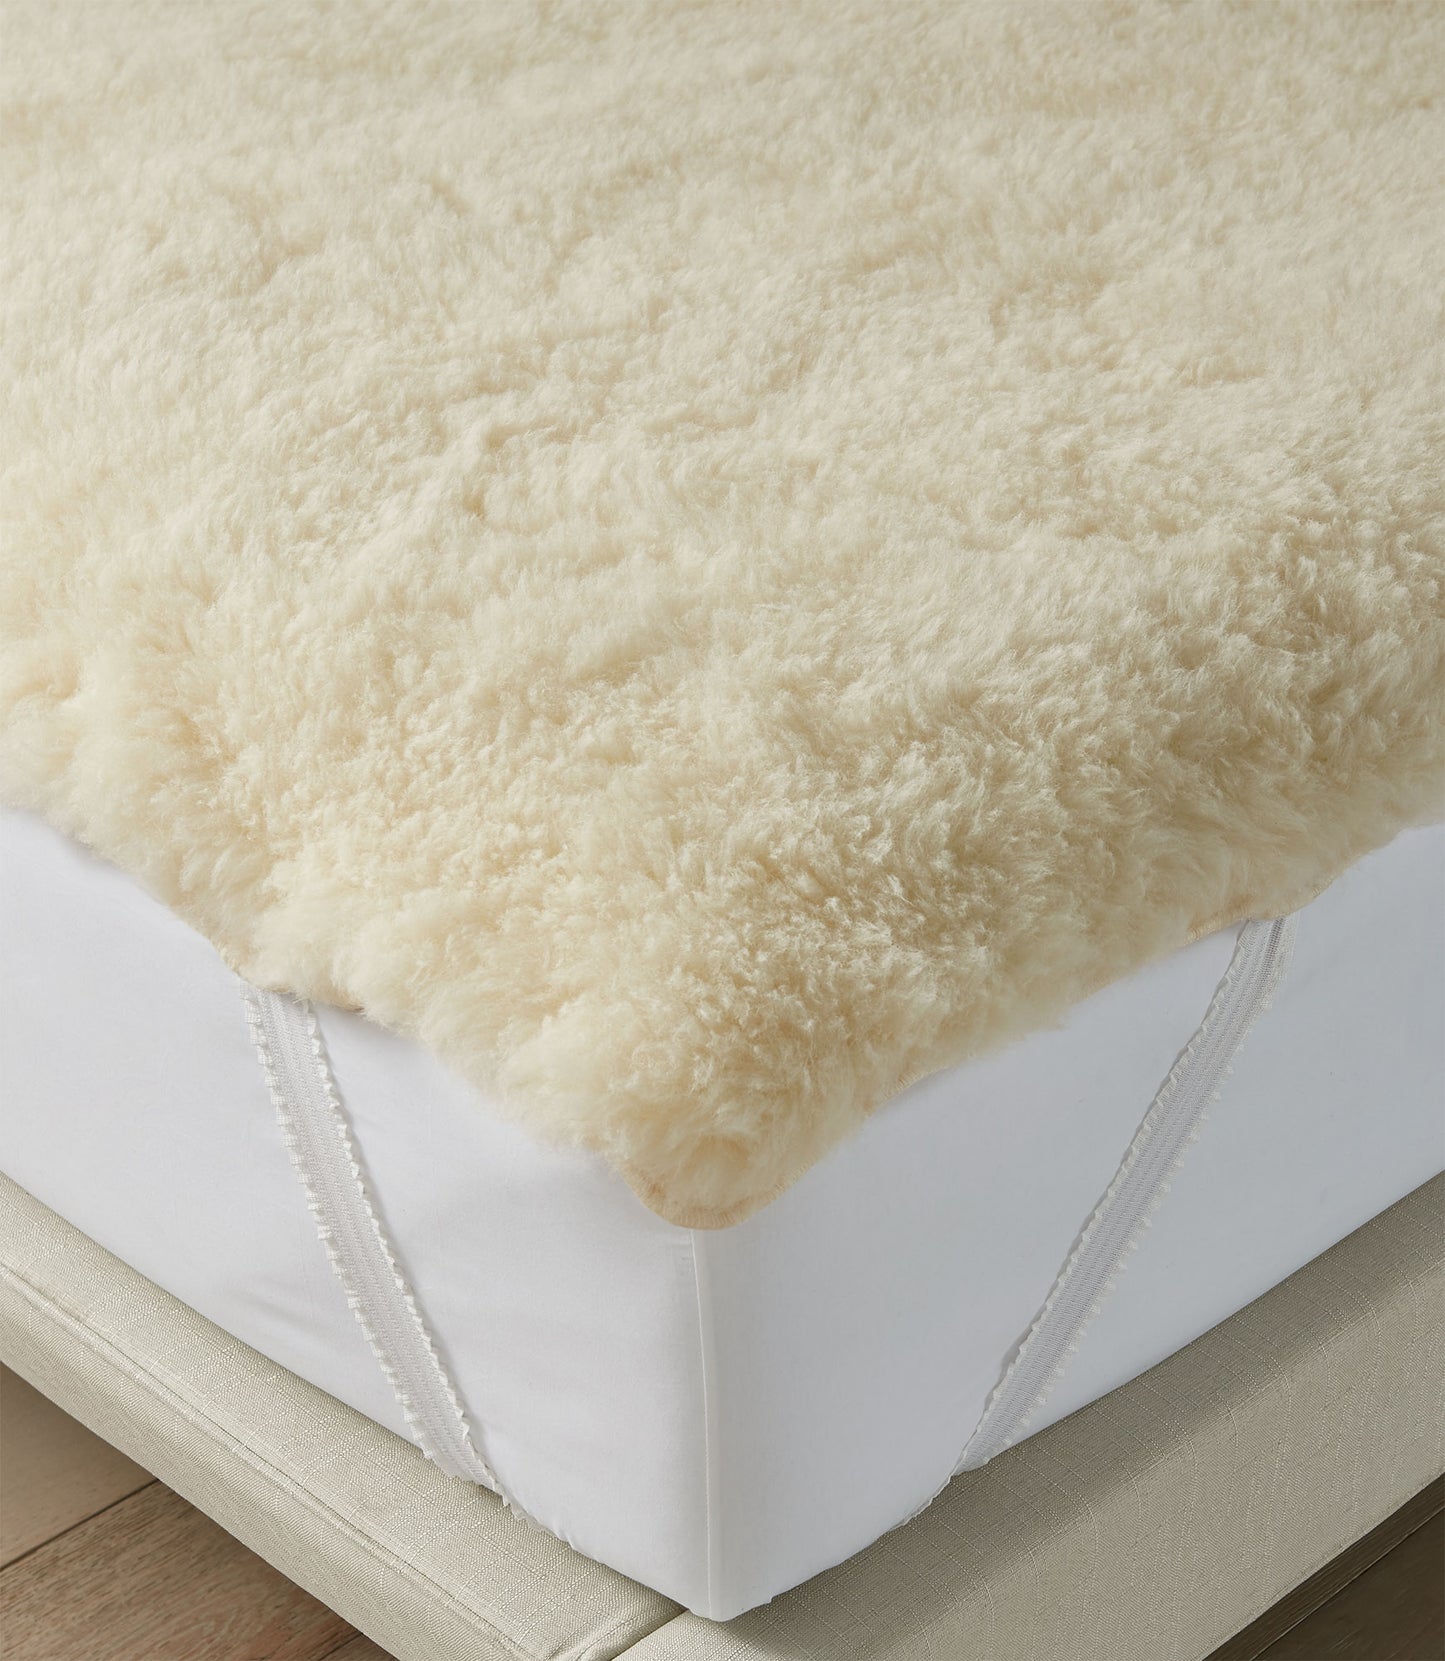 corner of wool mattress topper with elastic strap